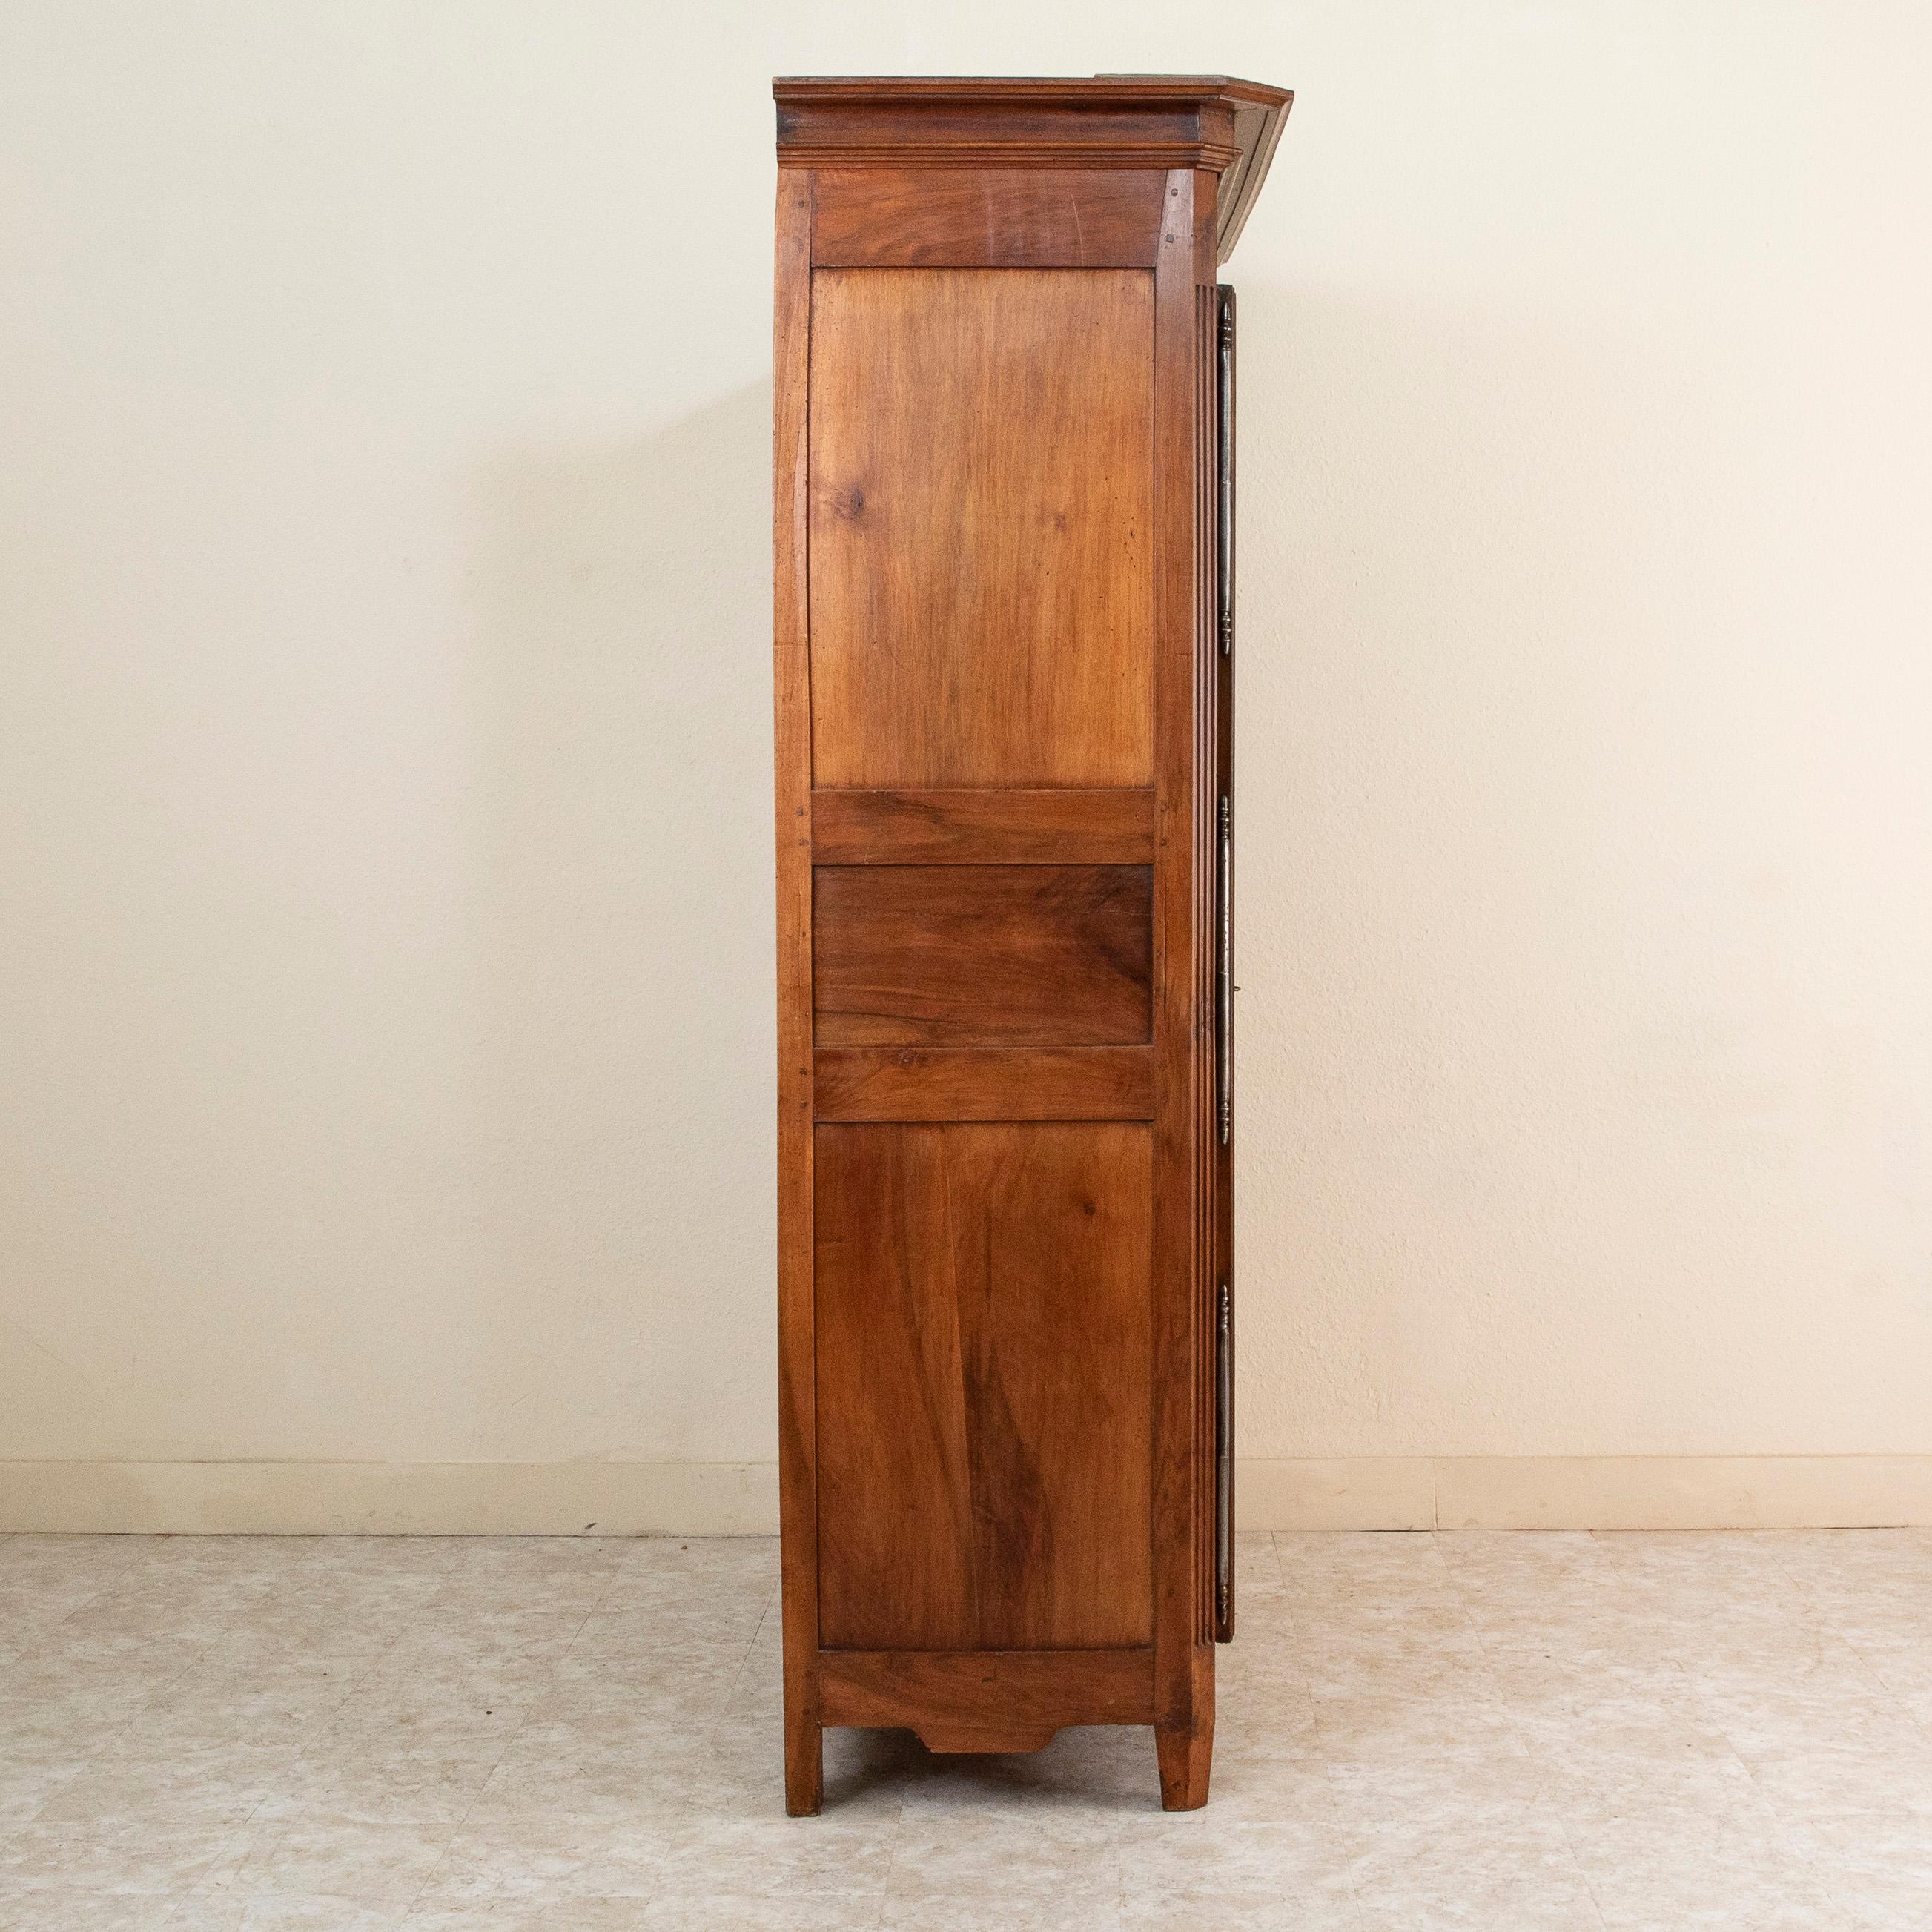 Late 18th Century French Directoire Period Walnut Armoire or Wardrobe 1